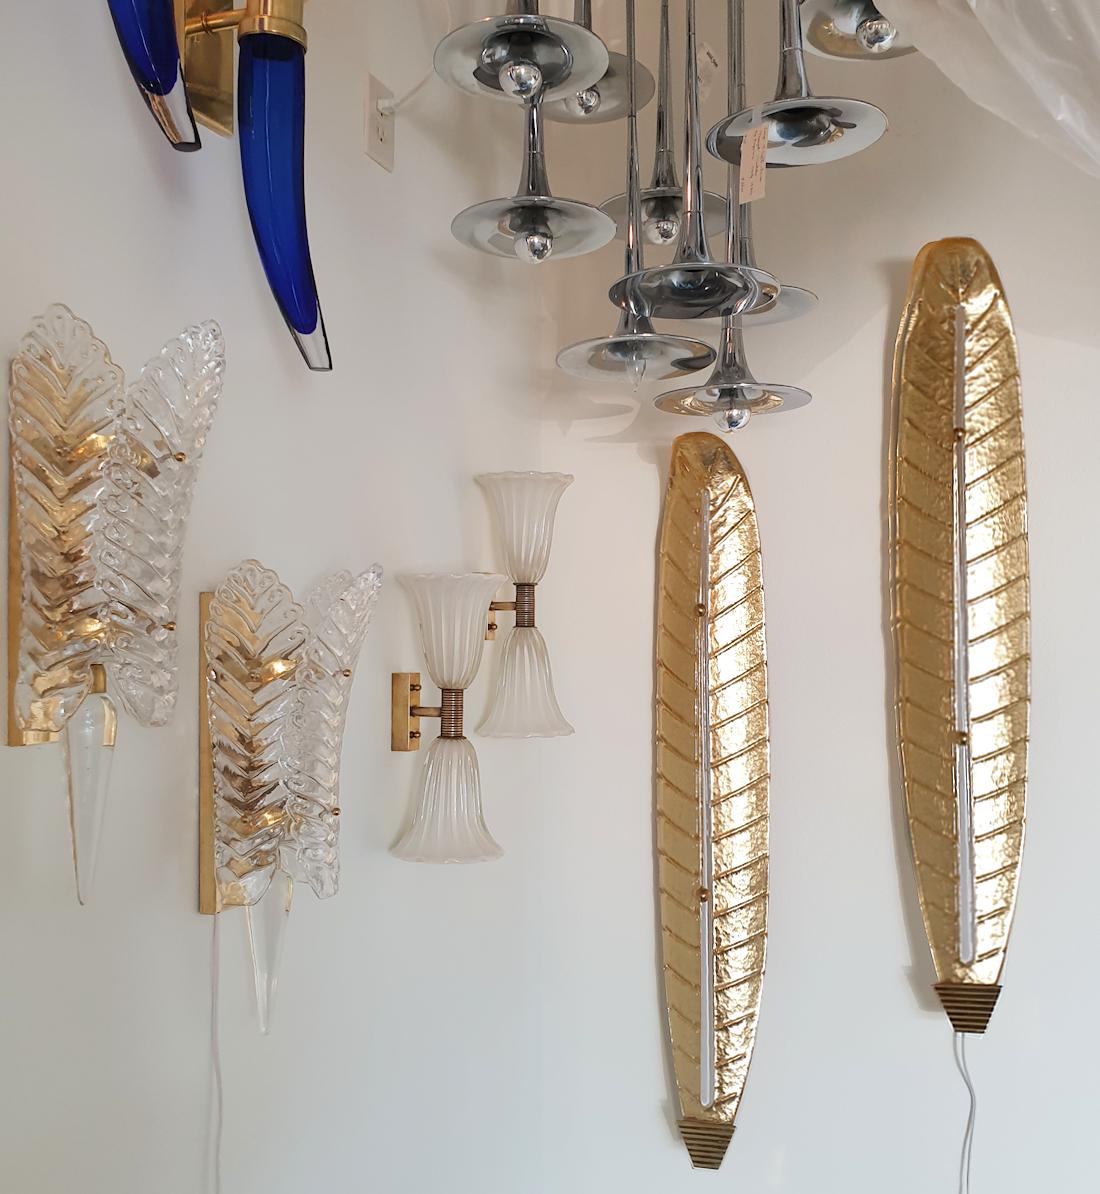 Pair of Mid-Century Modern, very tall and thin Murano glass leaf shaped sconces, Barovier & Toso style, Italy 1970s.
The neoclassical sconces are impressive by their dimensions and quality!
The vintage Murano sconces are made of real 24 carats gold